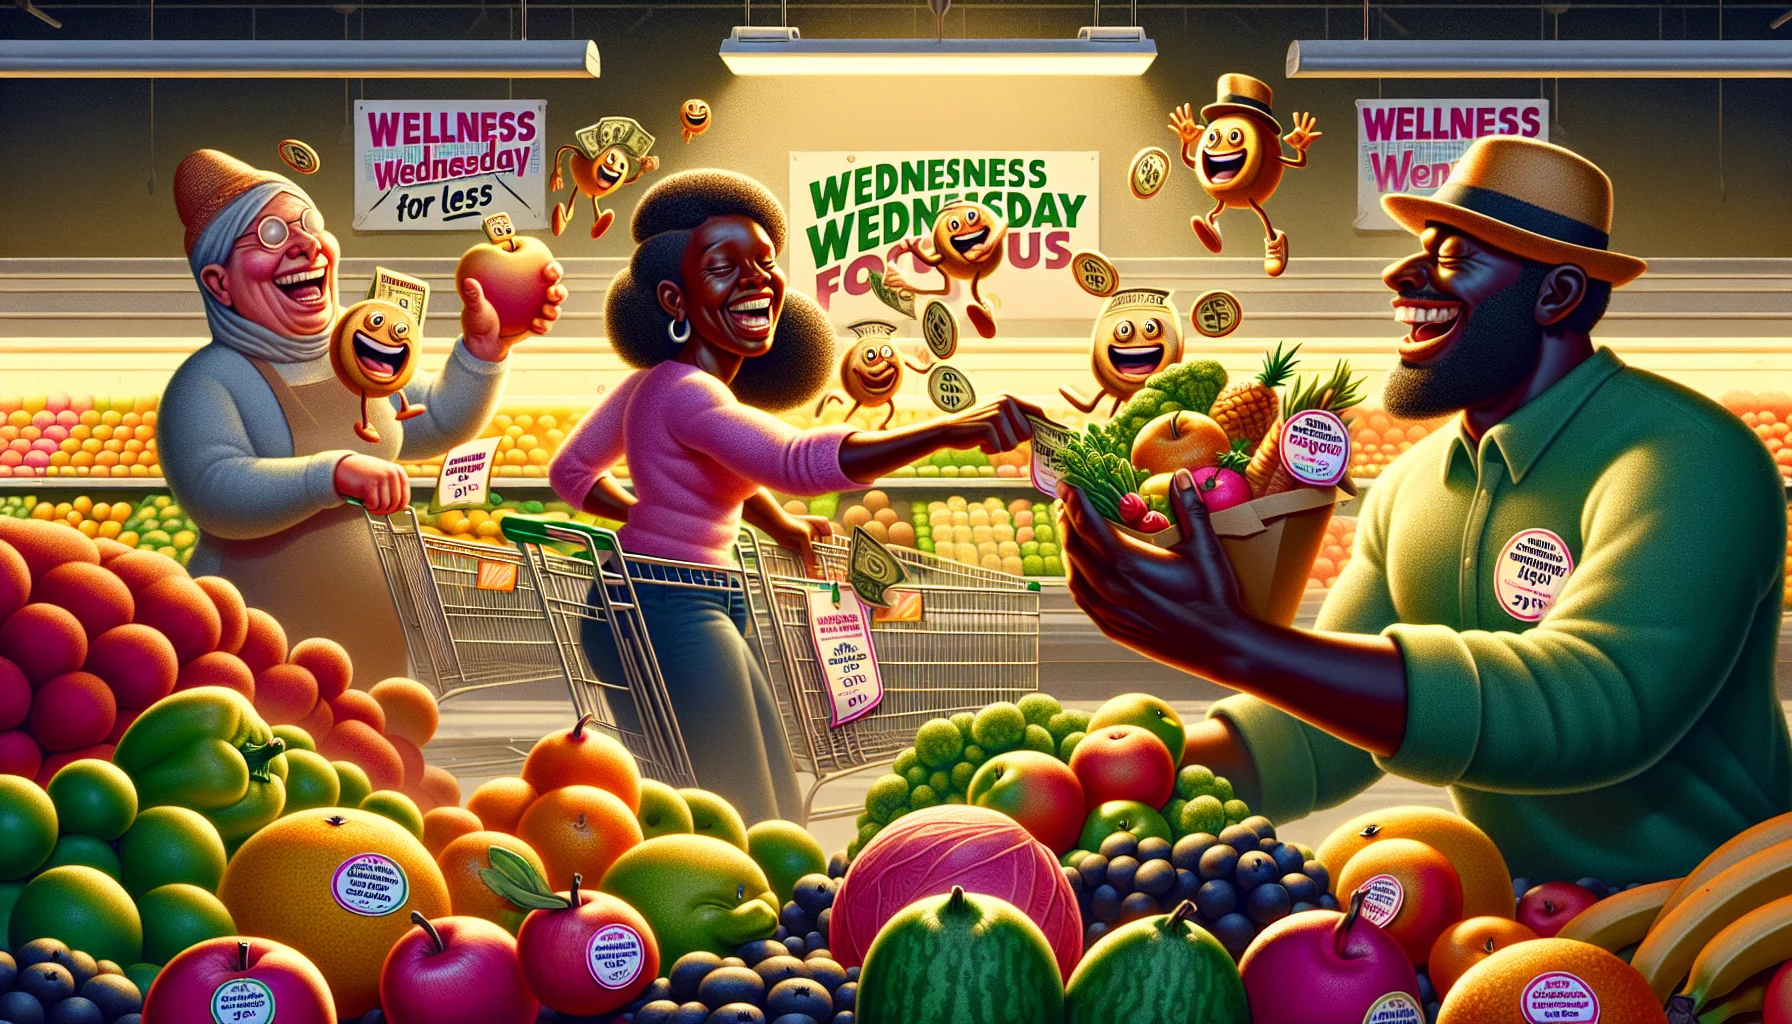 An amusing scenario depicting 'Wednesday Wellness Focus' in a grocery store. A couple of people of diverse descents, one being a Black woman and the other a Middle Eastern man are ecstatically picking up vibrantly colored fruits and vegetables, each with discount tags attached, signifying affordability. Around them, mischievous, anthropomorphic coins and bills are skipping joyously, metaphorically implying 'eating healthy for less'. Stickers and signs around the store enthusiastically promote 'Wellness Wednesday' deals on fresh produce. The scene is bathed in warm, inviting colors underscoring the idea of health and savings.